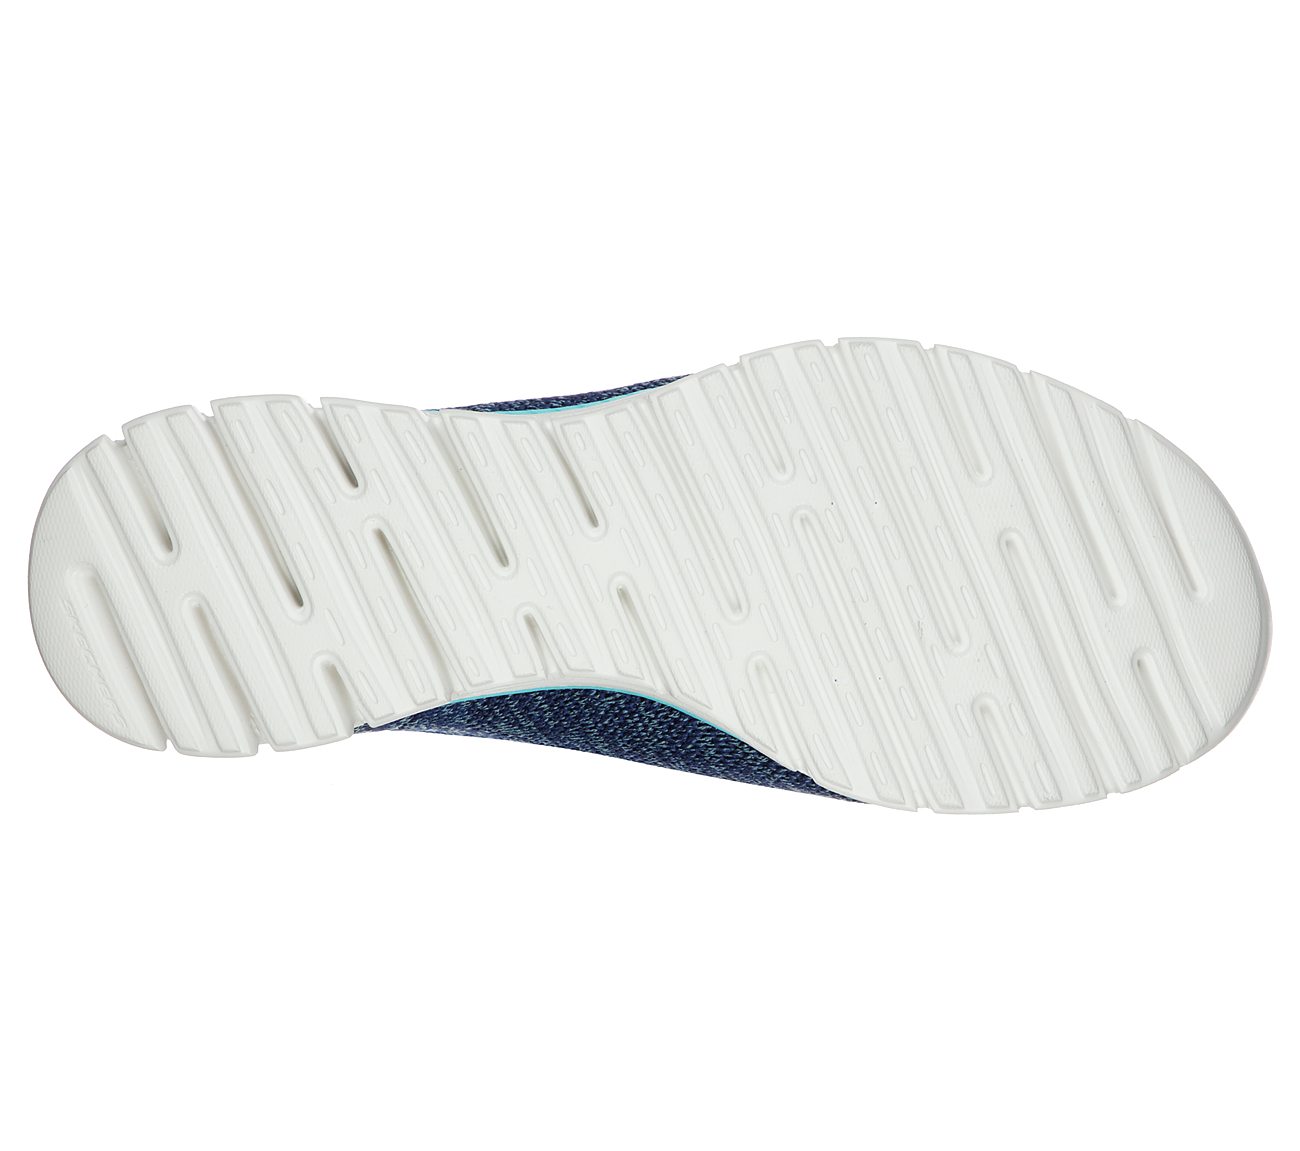 LUMINATE - SHE'S MAGNIFICENT, NAVY/BLUE Footwear Bottom View